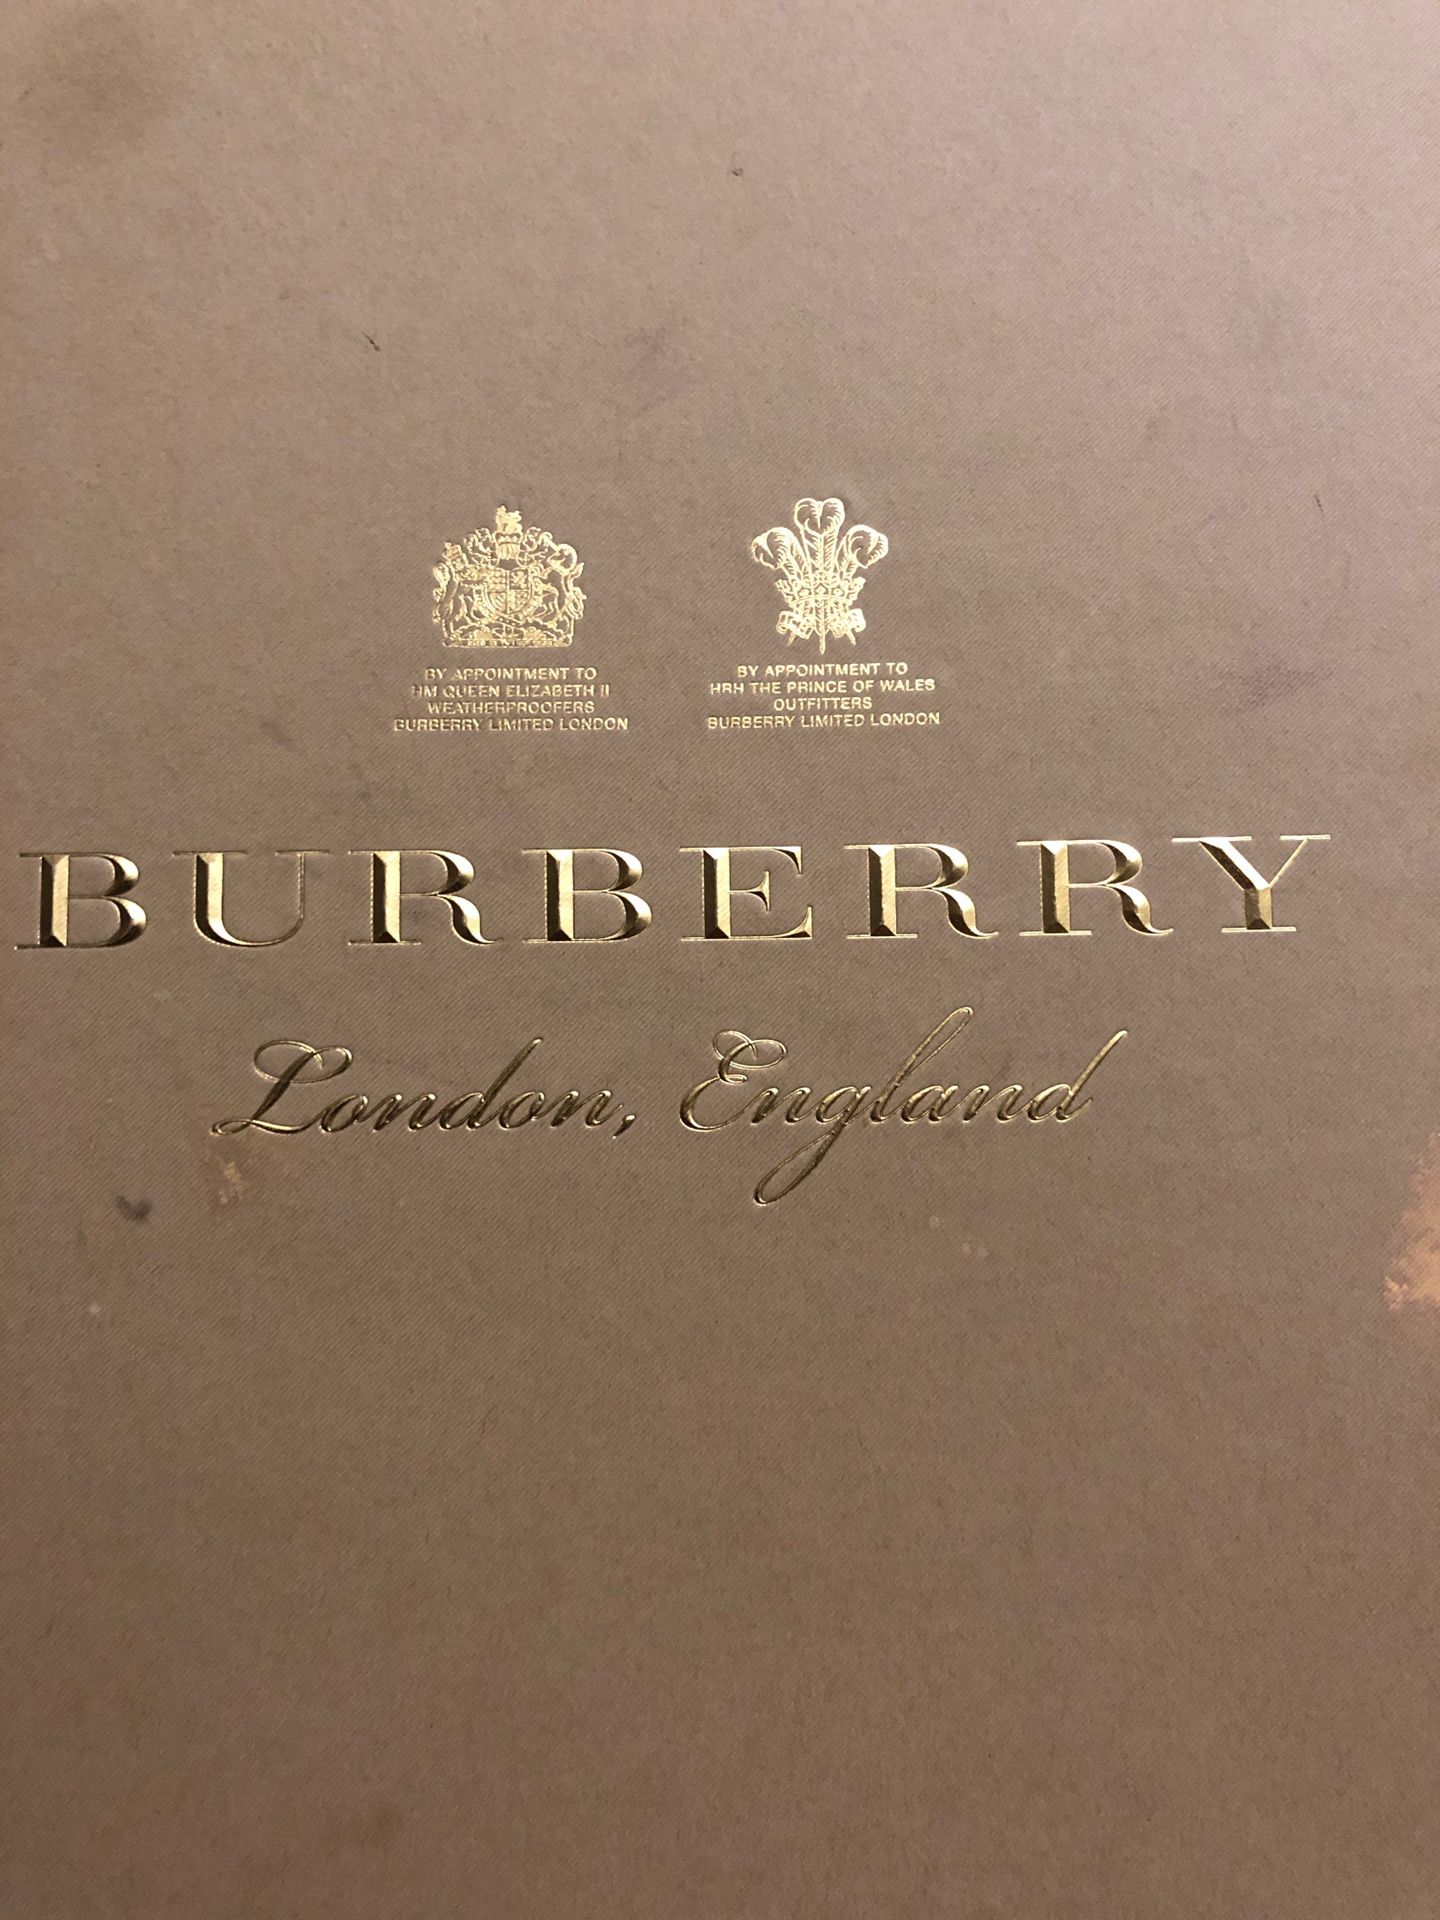 Burberry long sleeve button up